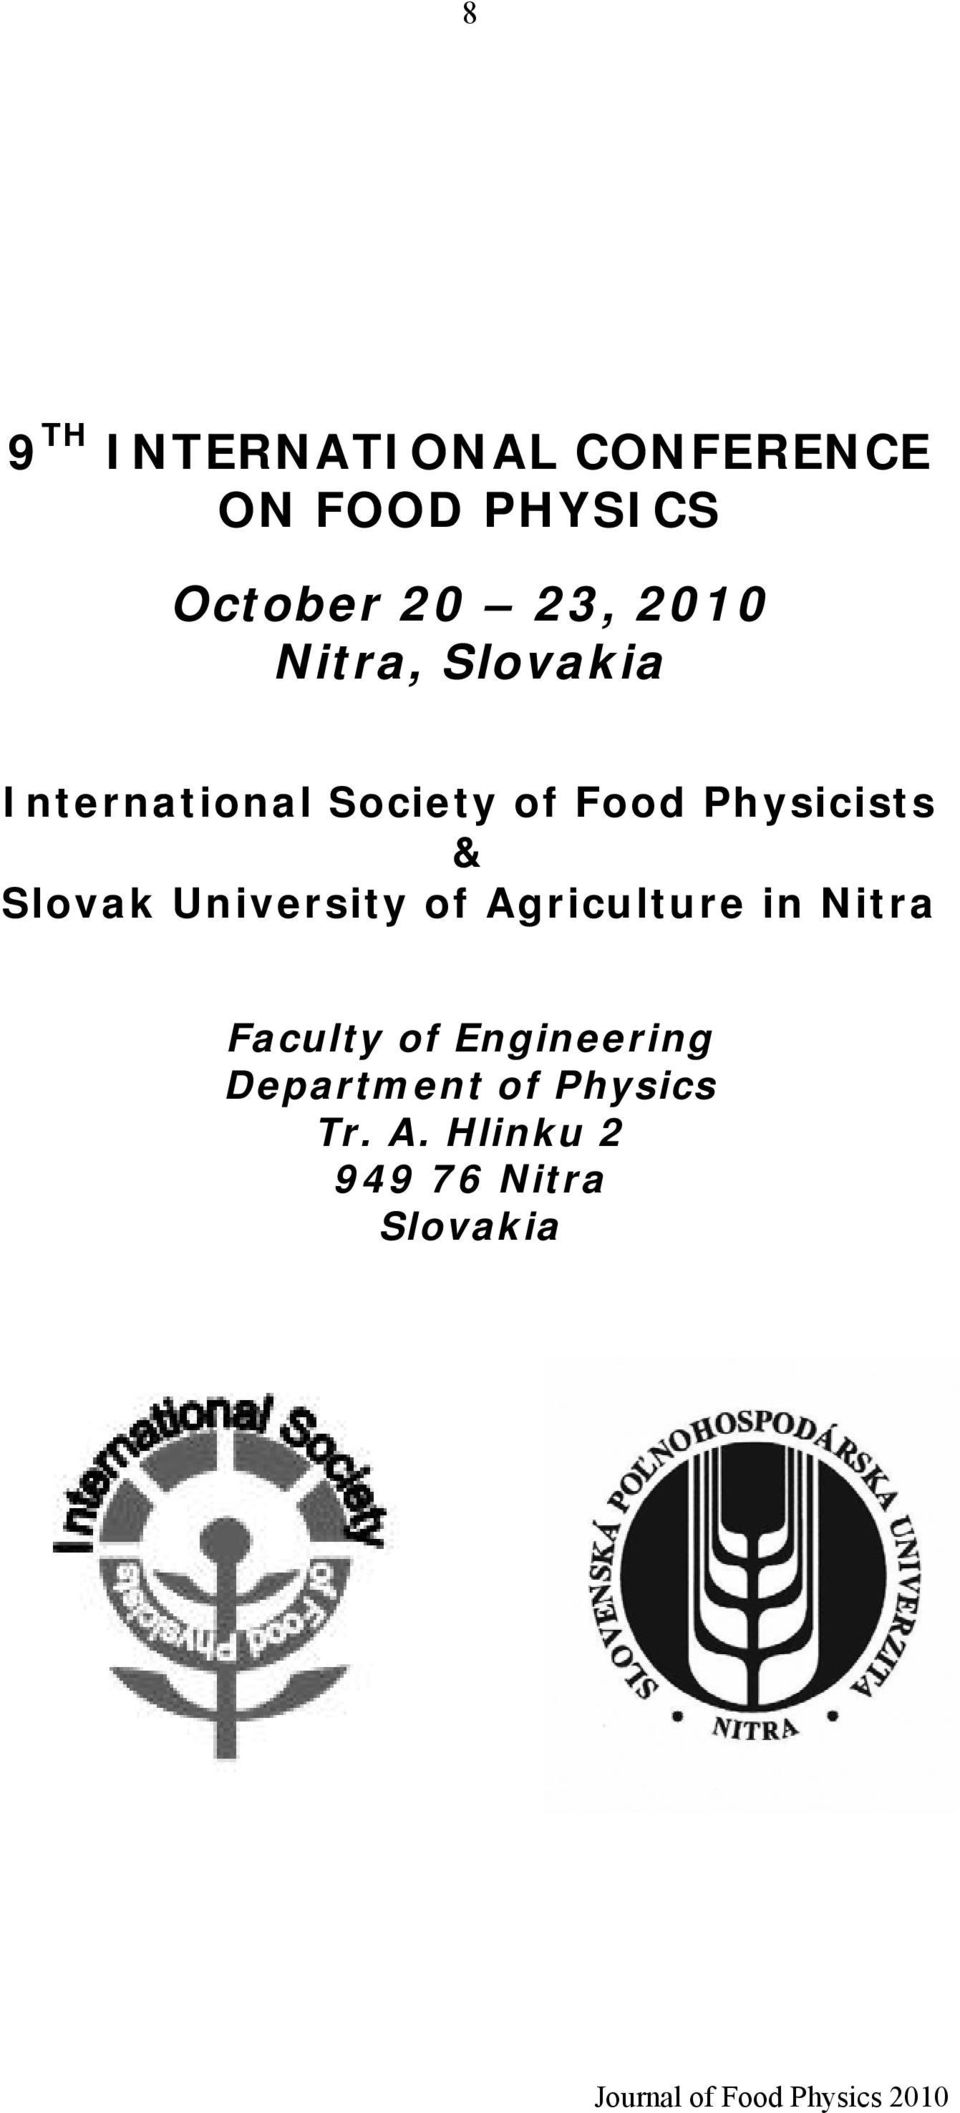 & Slovak University of Agriculture in Nitra Faculty of